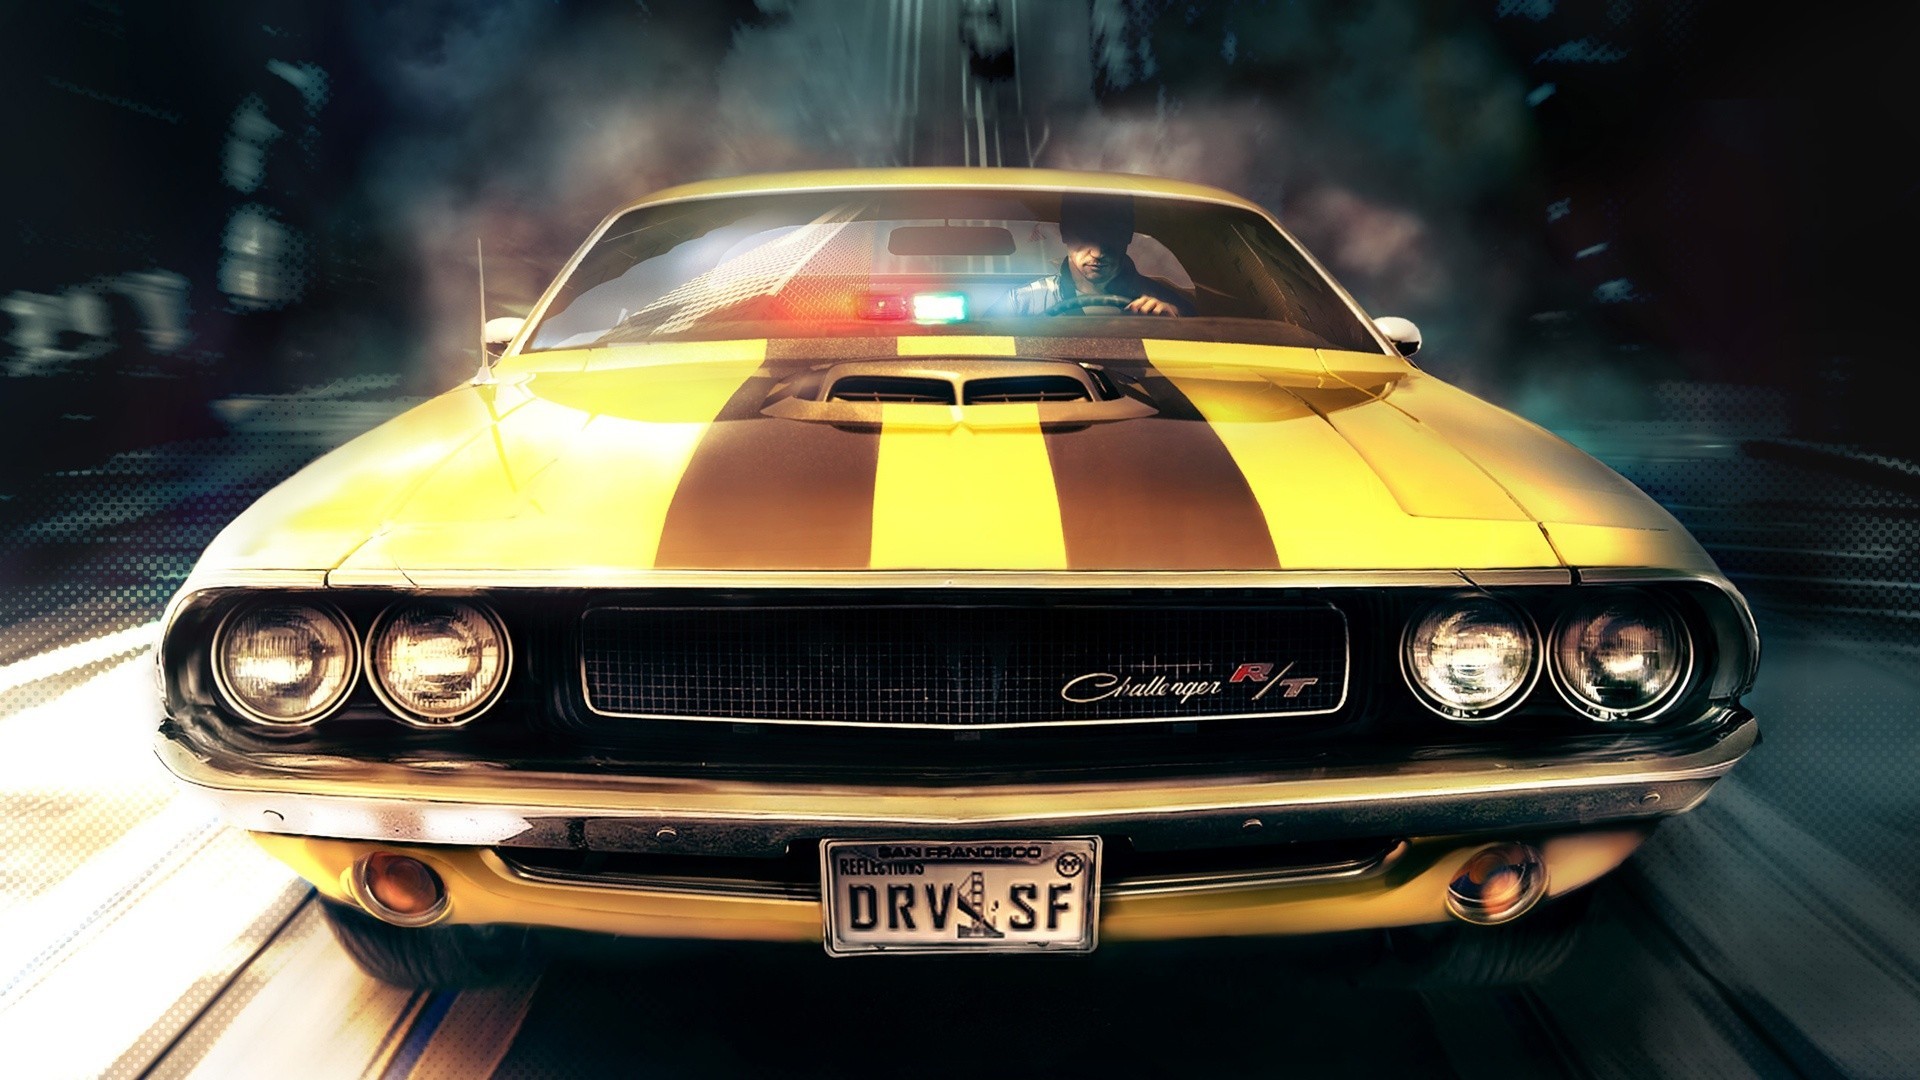 1920x1080 American Muscle Car Wallpaper - Android Apps on Google Play ...